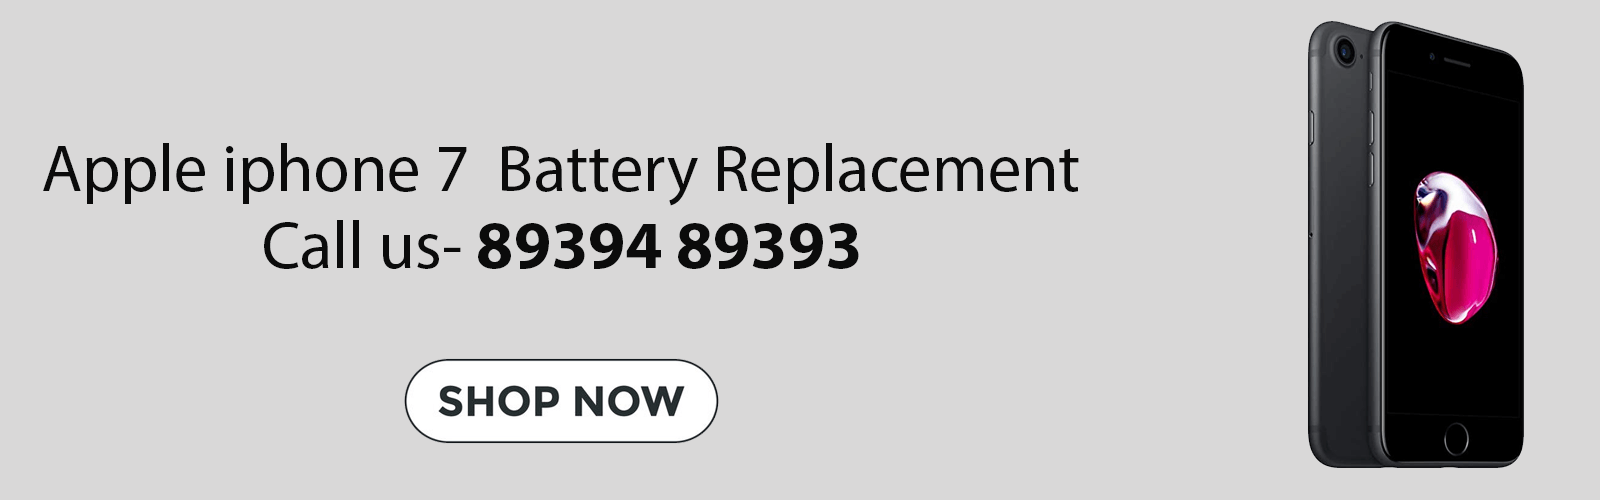 iPhone 7 Battery Replacement Price Chennai